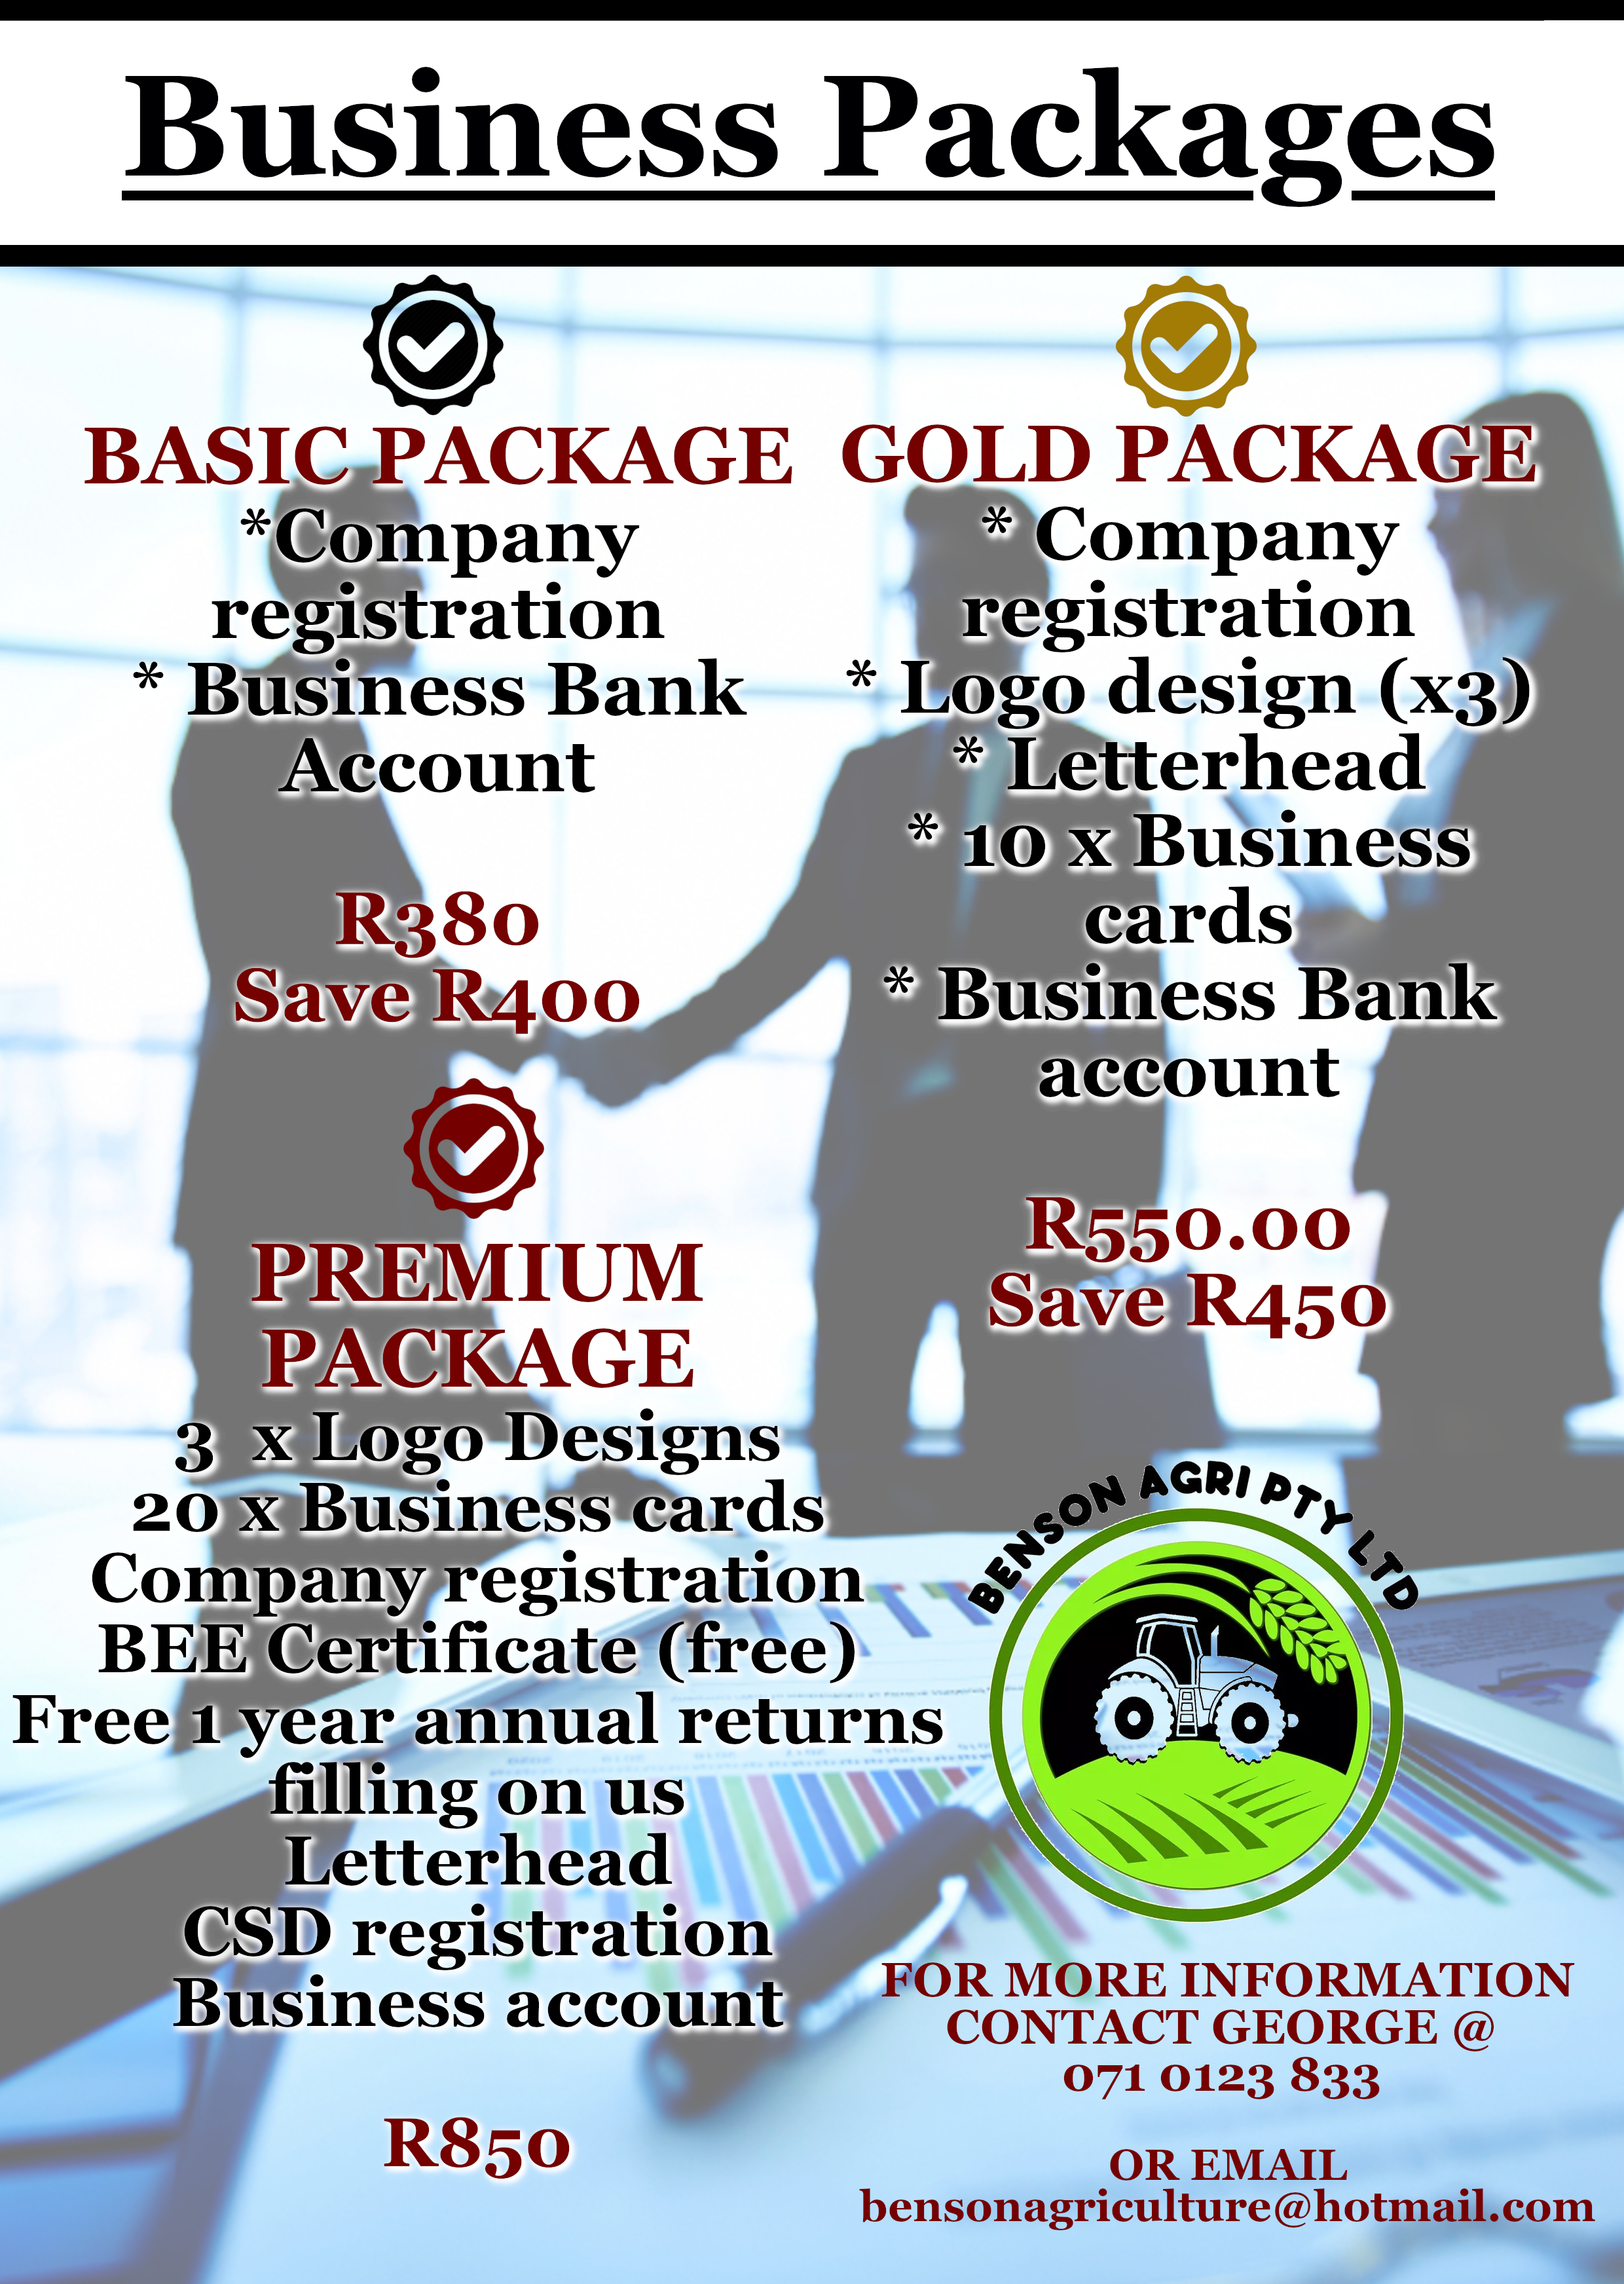 Our Online Business Packages 